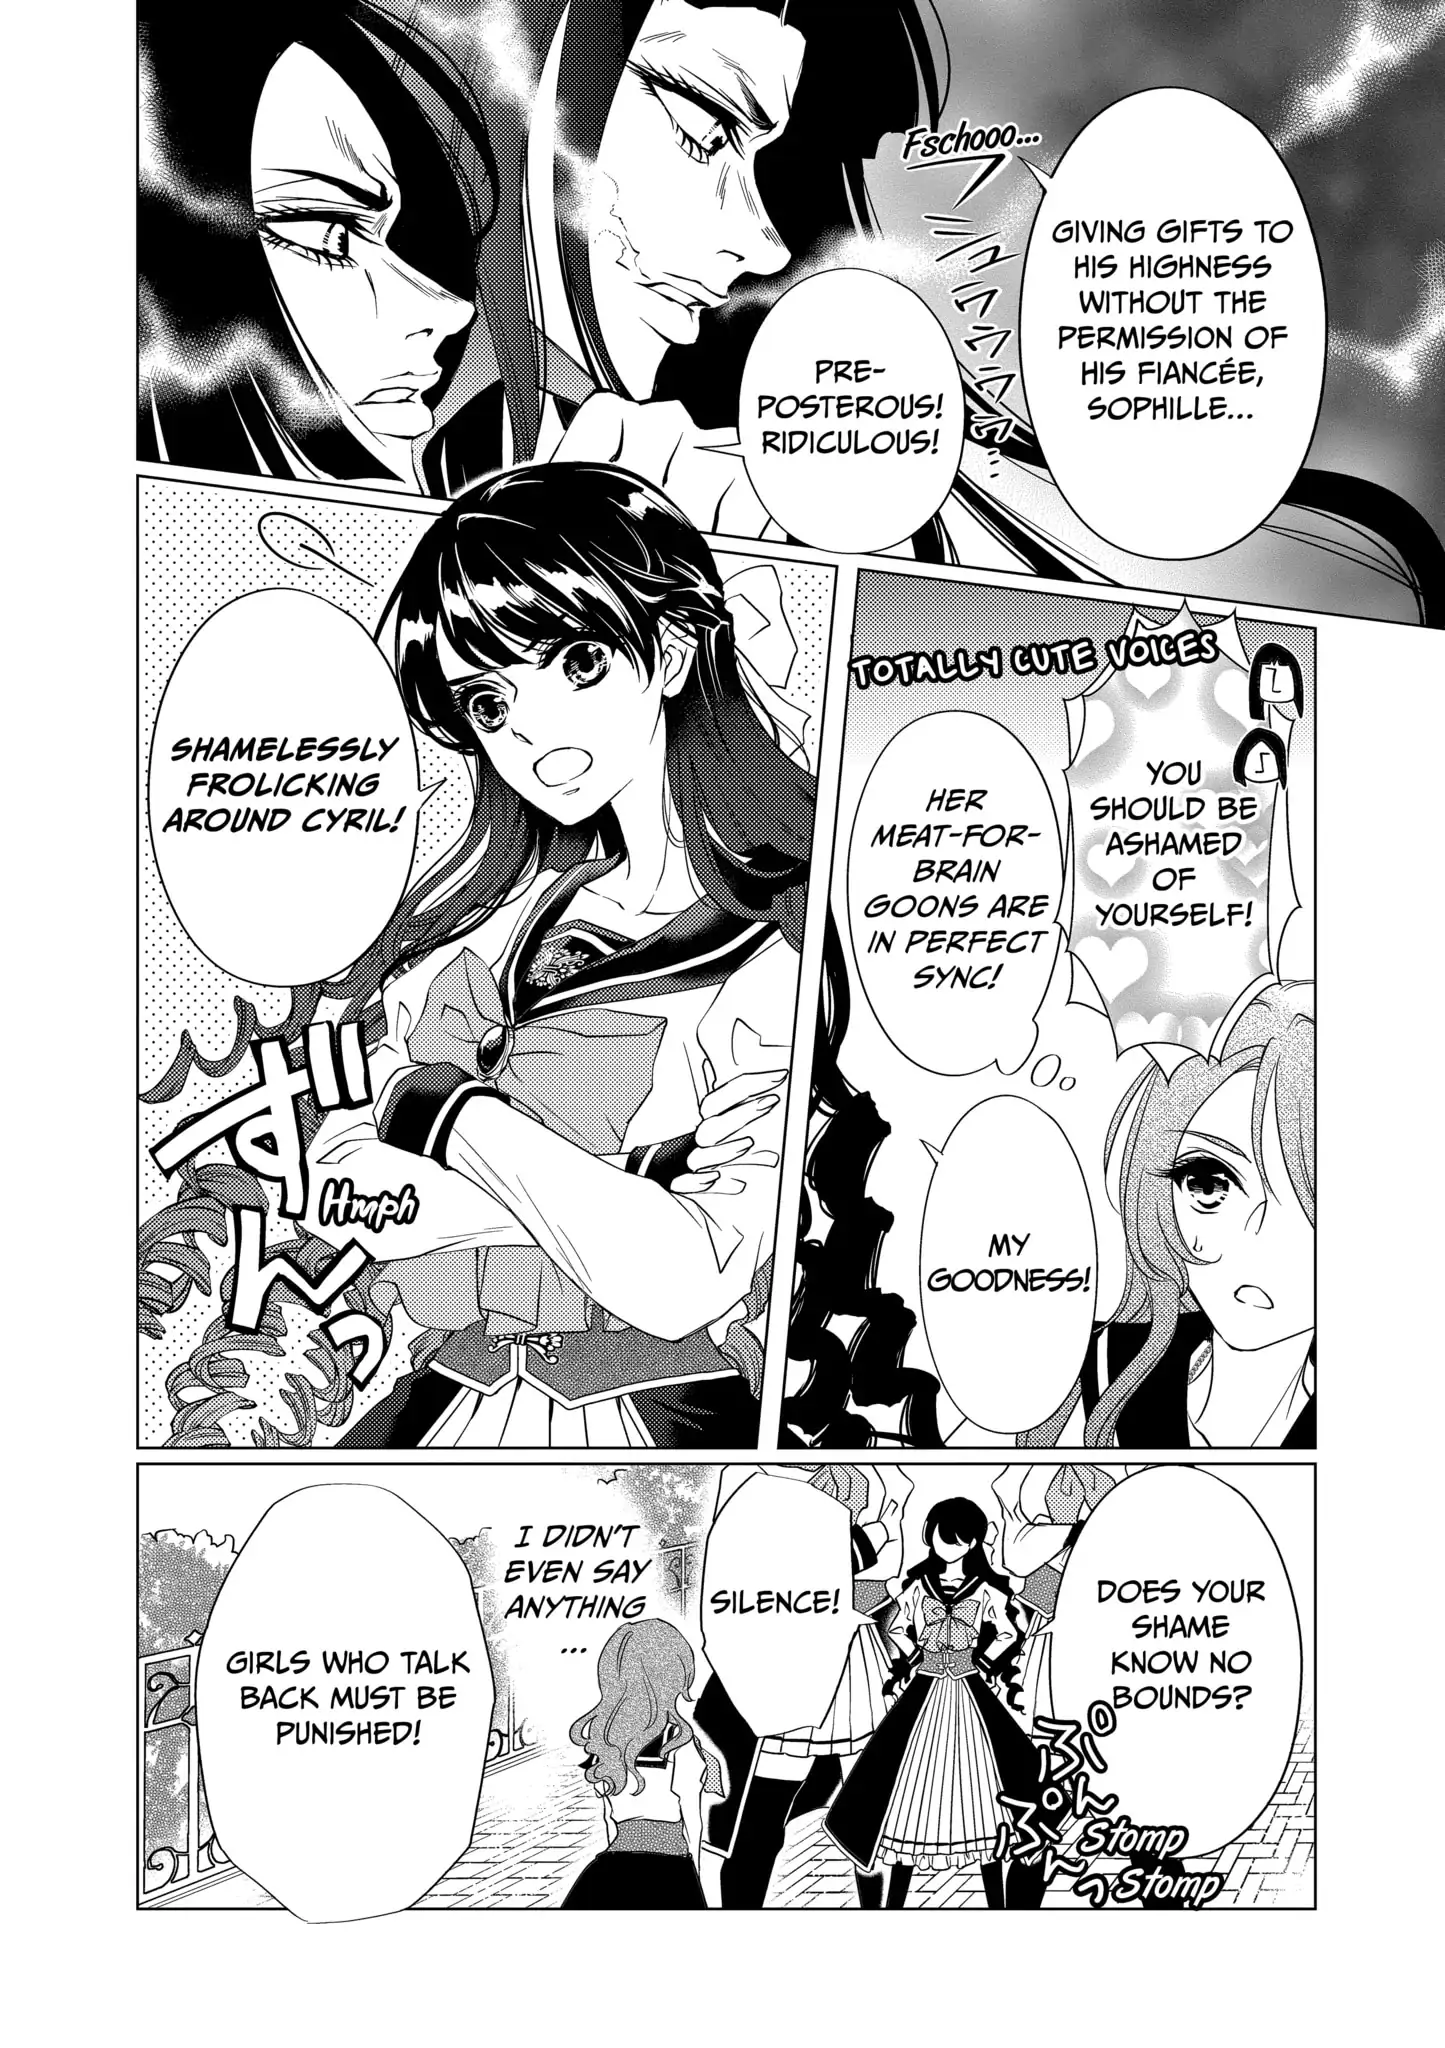 On Her 94Th Reincarnation This Villainess Became The Heroine! - Page 2